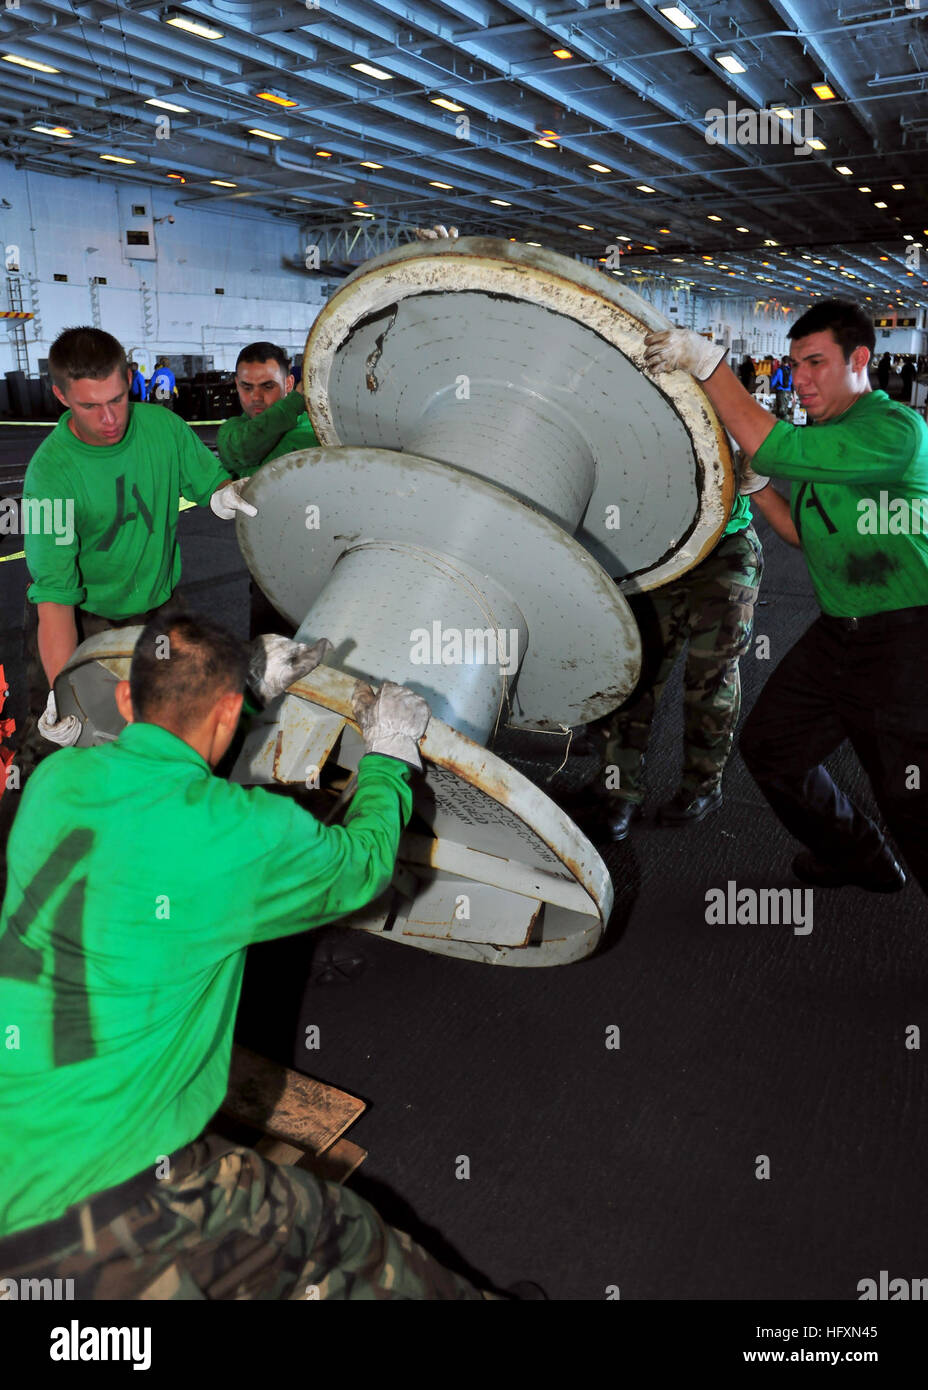 100718-N-0569K-126 ATLANTIC OCEAN (July 18, 2010) Sailors assigned to the Air department of the aircraft carrier USS Enterprise (CVN 65) move a spool that holds the number two arresting gear wire. Enterprise is on a scheduled underway for fleet replacement squadron carrier qualifications and is making preparations for its 21st deployment. (U.S. Navy photo by Mass Communication Specialist Seaman Apprentice Jared M. King/Released) US Navy 100718-N-0569K-126 Sailors assigned to the Air department of the aircraft carrier USS Enterprise (CVN 65) move a spool that holds the number two arresting gear Stock Photo